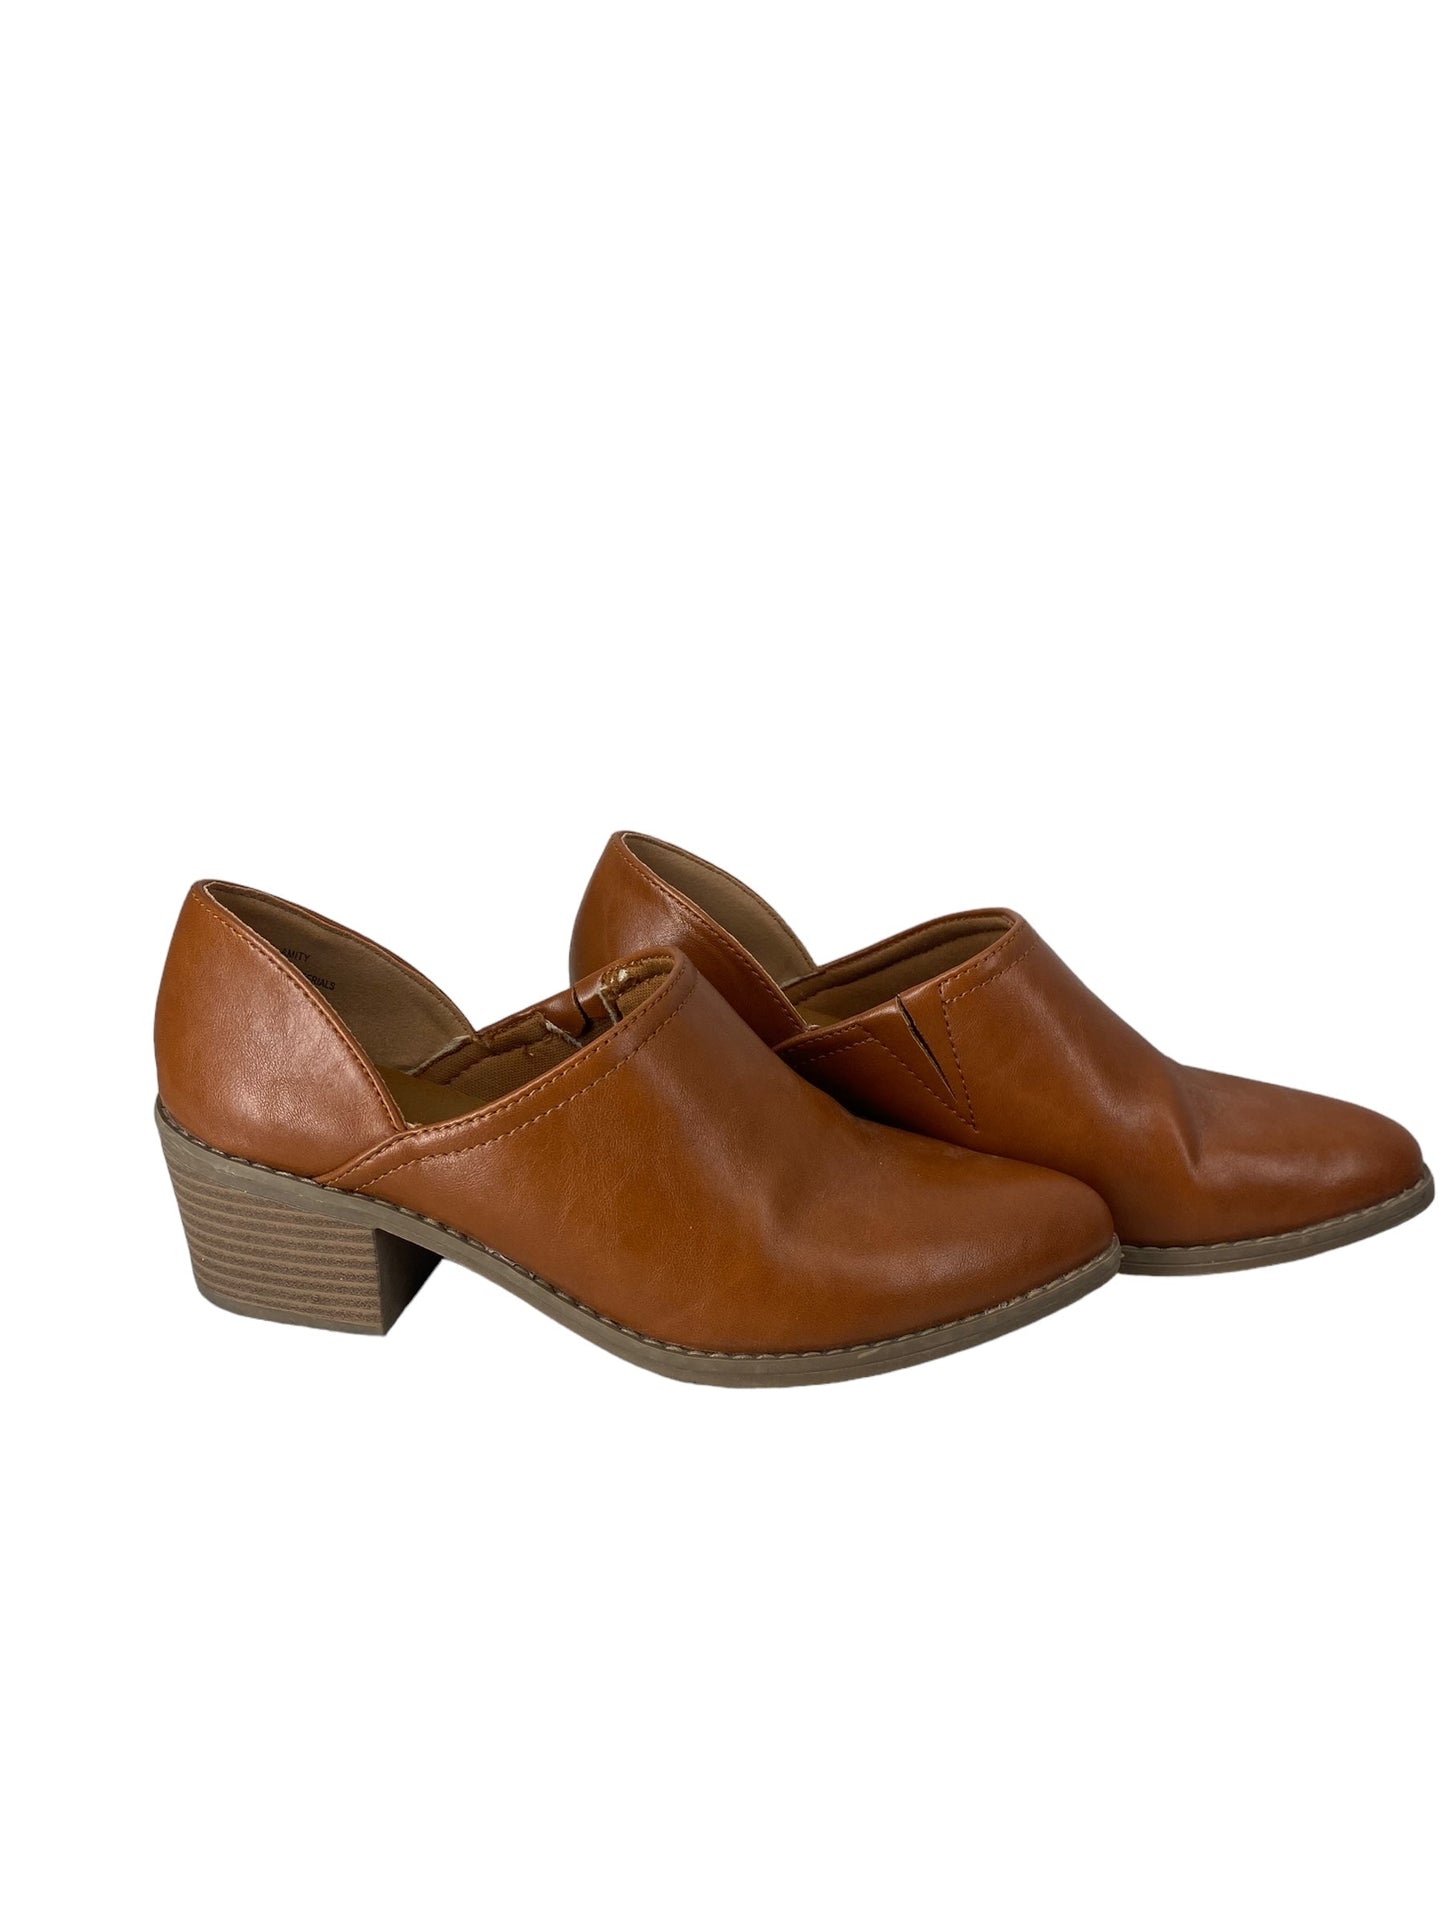 Brown Shoes Flats Ana, Size 7